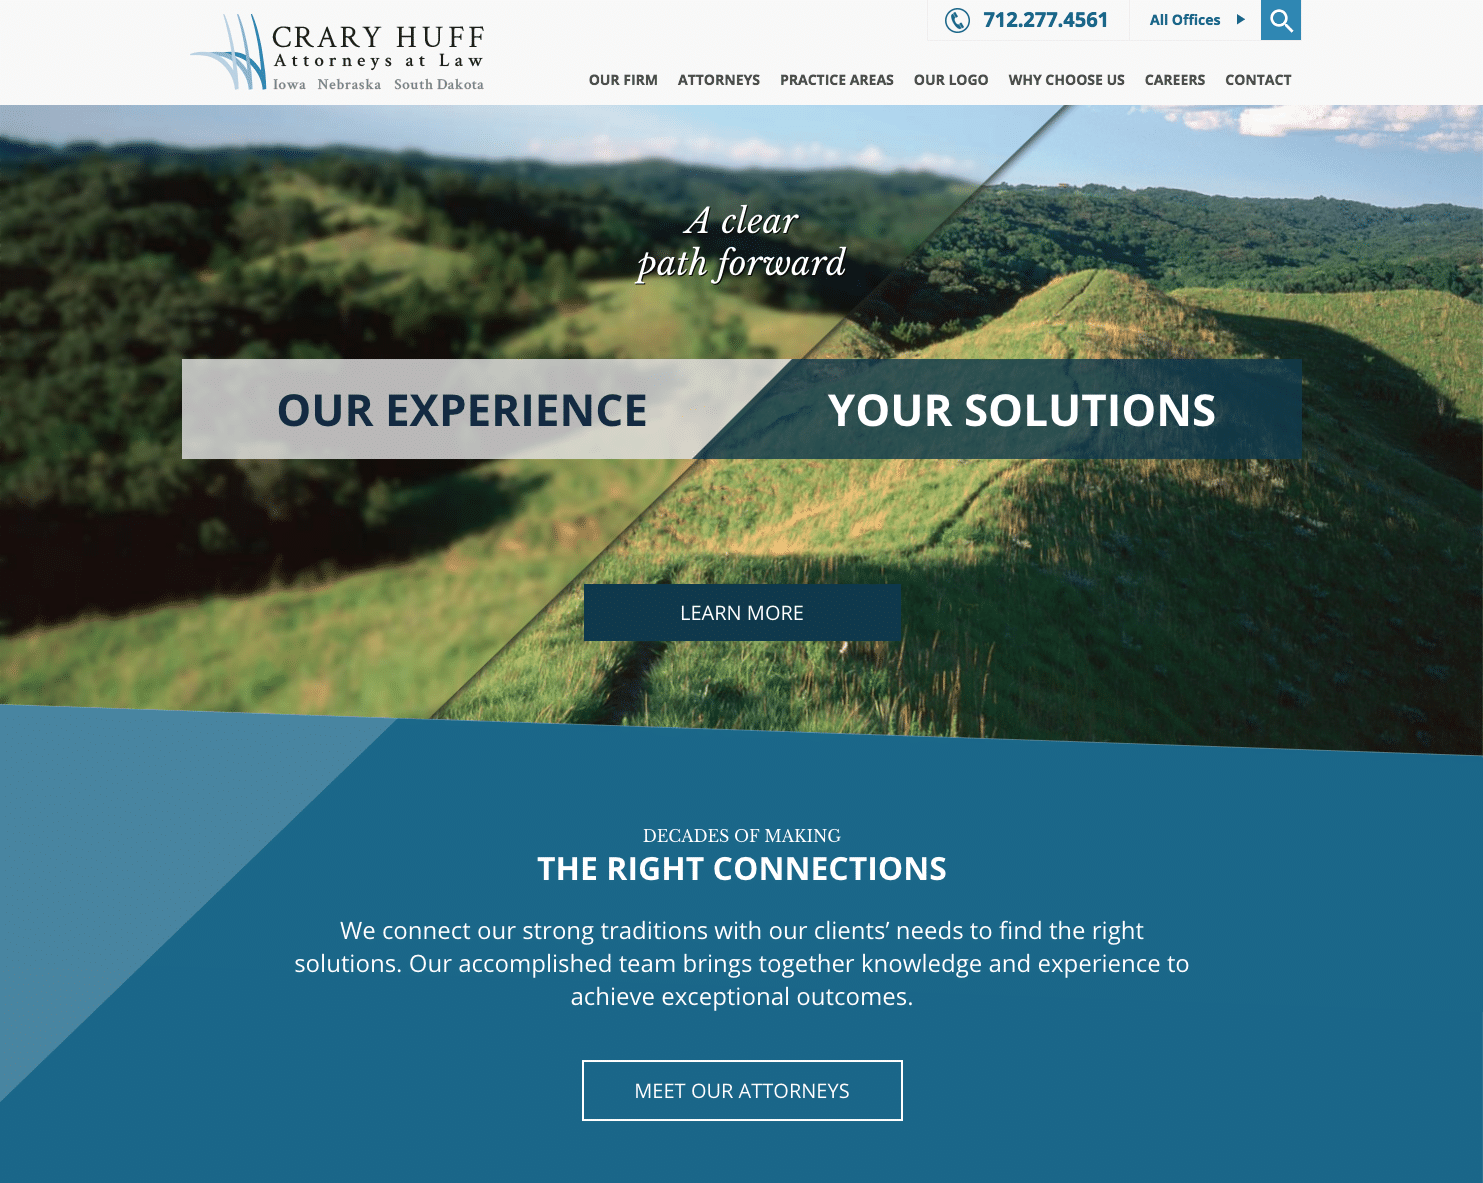 Crary Huff Law Firm - Business Website Design Example